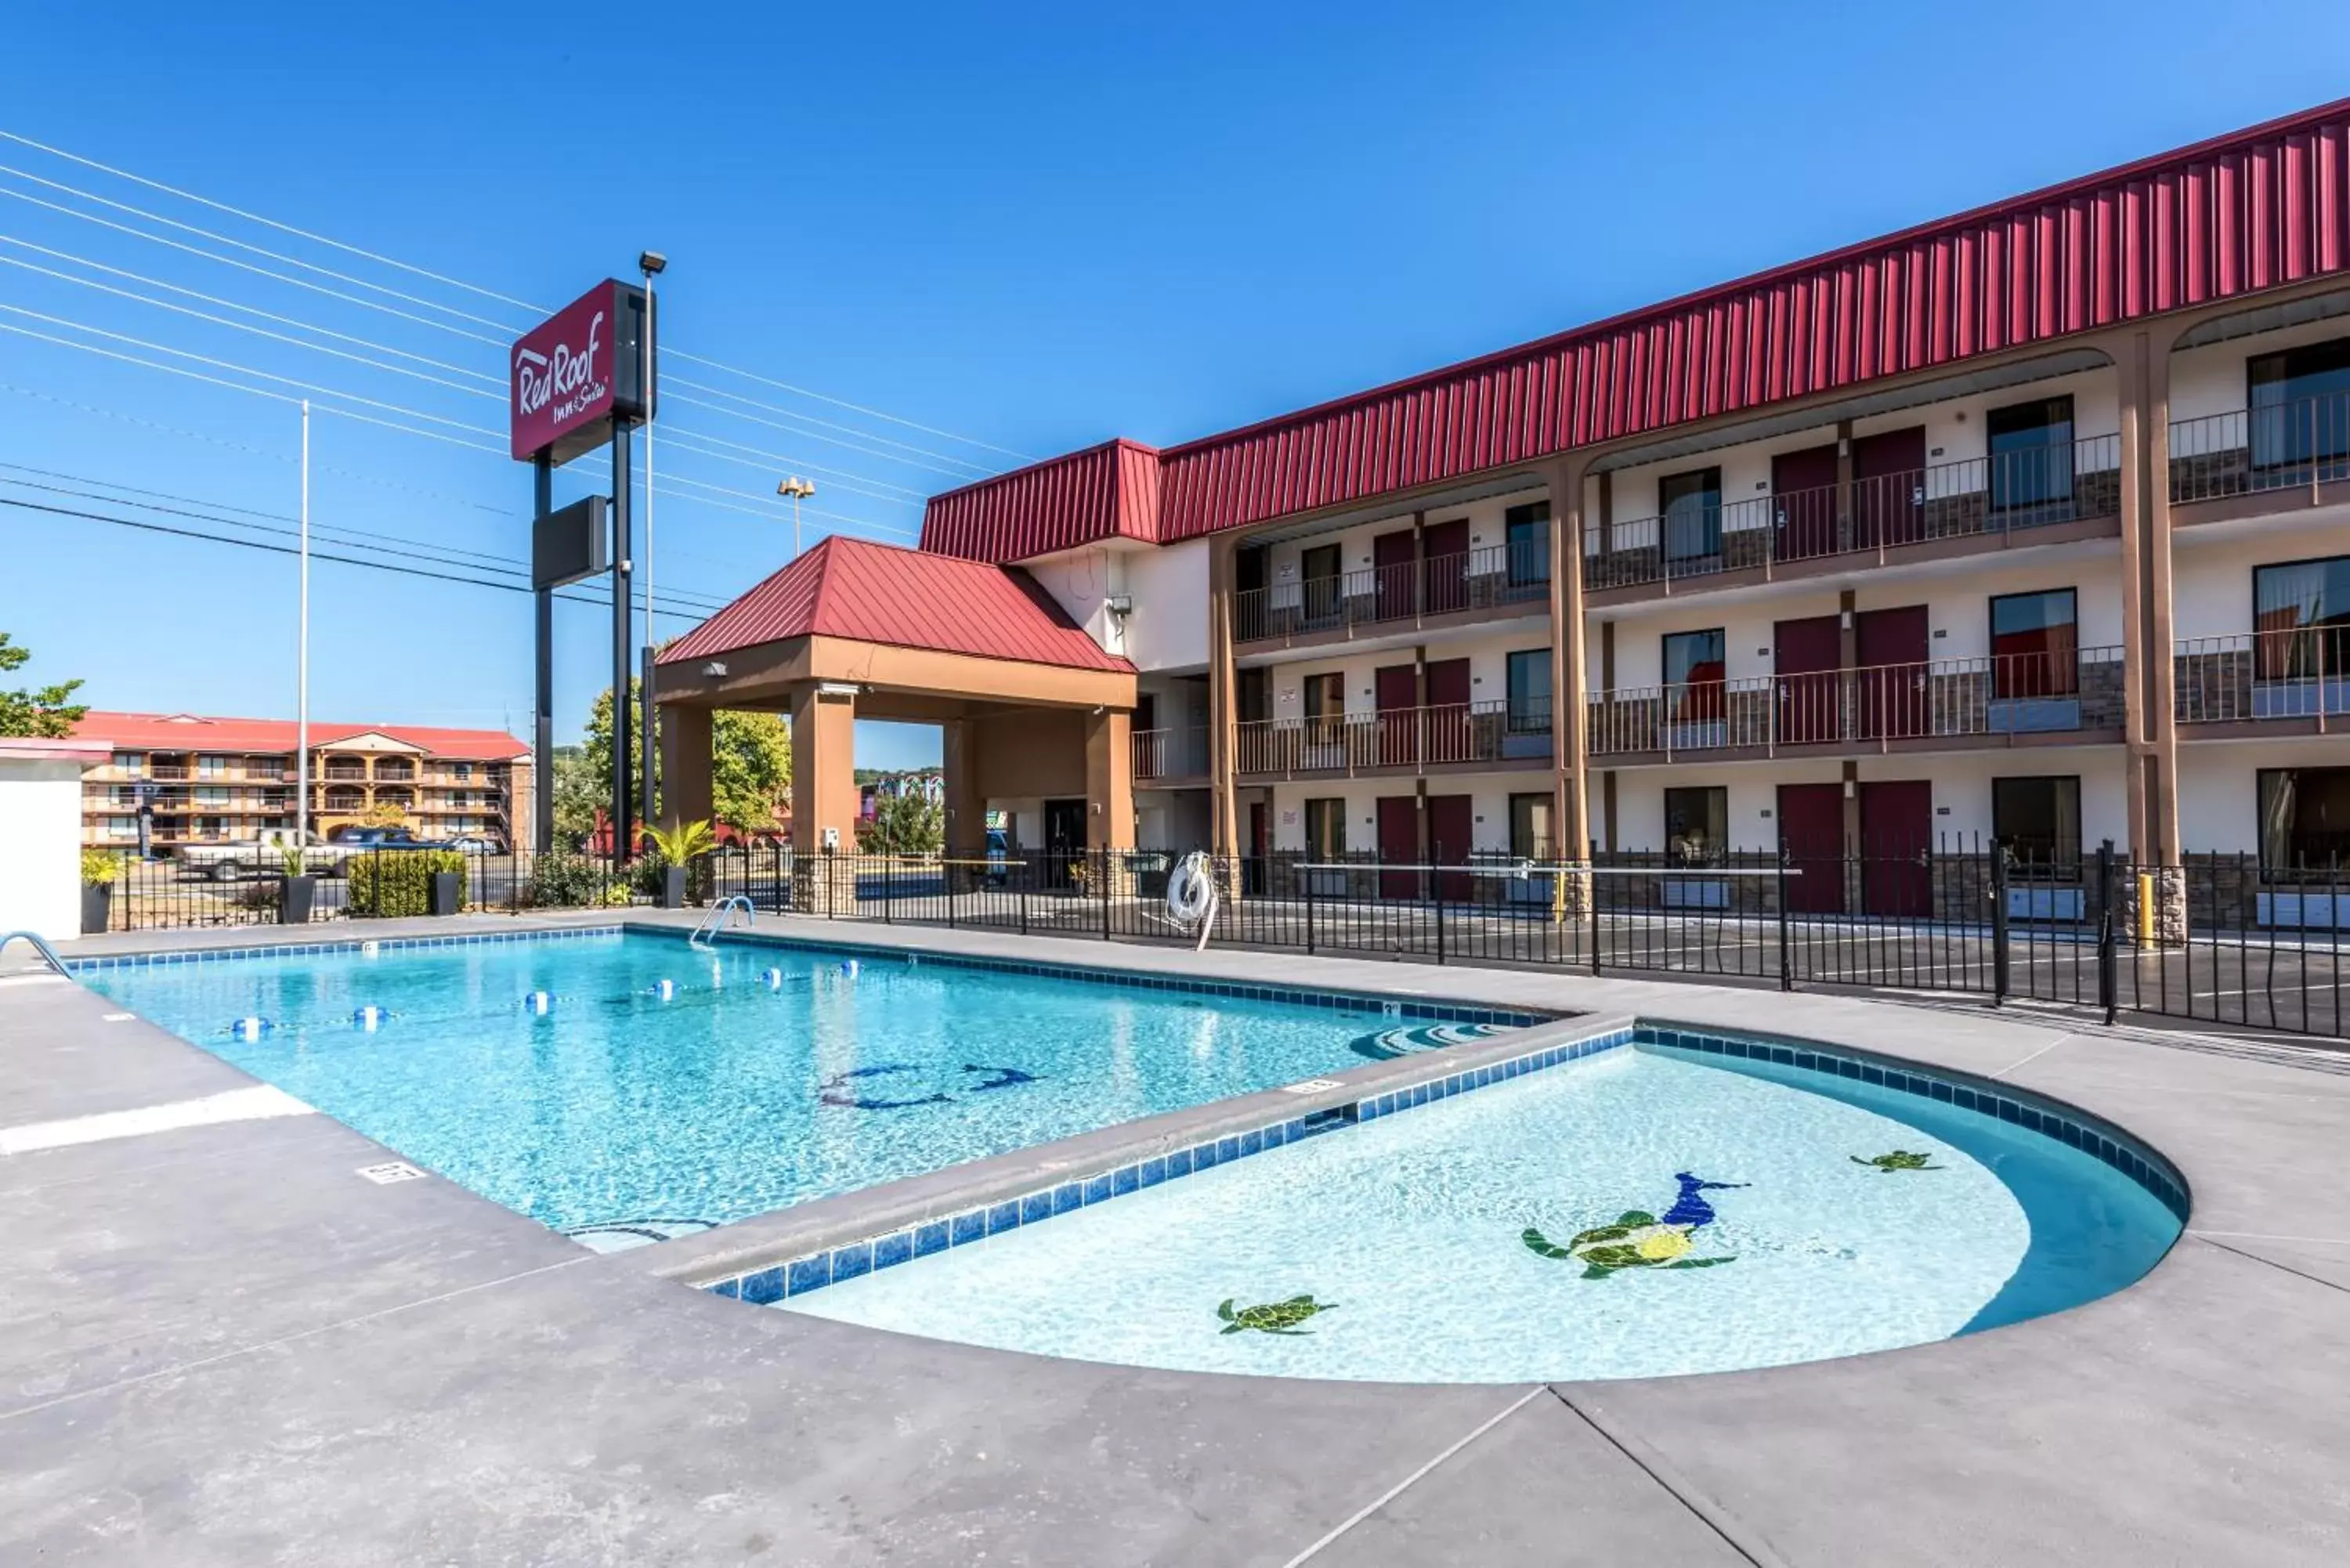 Swimming pool in Red Roof Inn & Suites Pigeon Forge Parkway